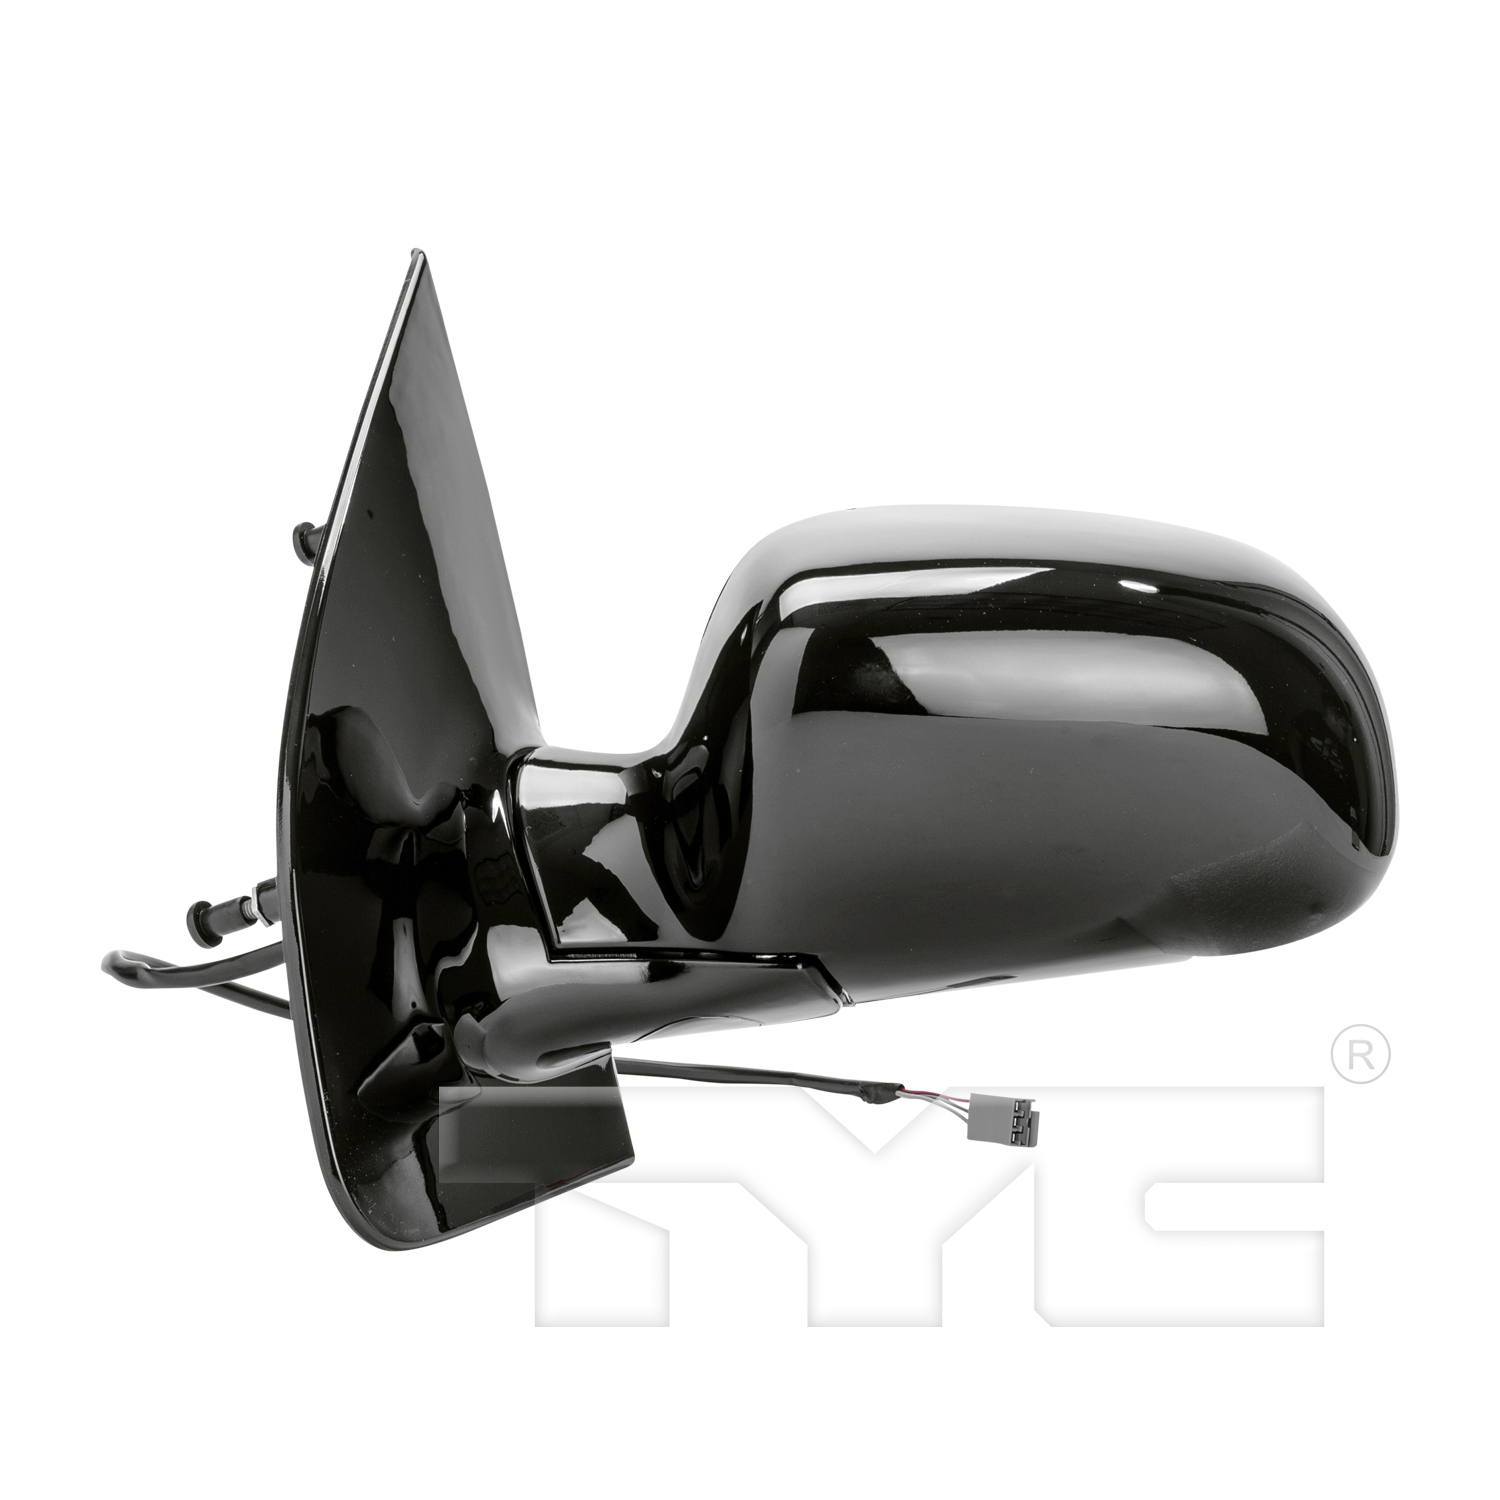 Aftermarket MIRRORS for CHEVROLET - EXPRESS 2500, EXPRESS 2500,96-02,LT Mirror outside rear view